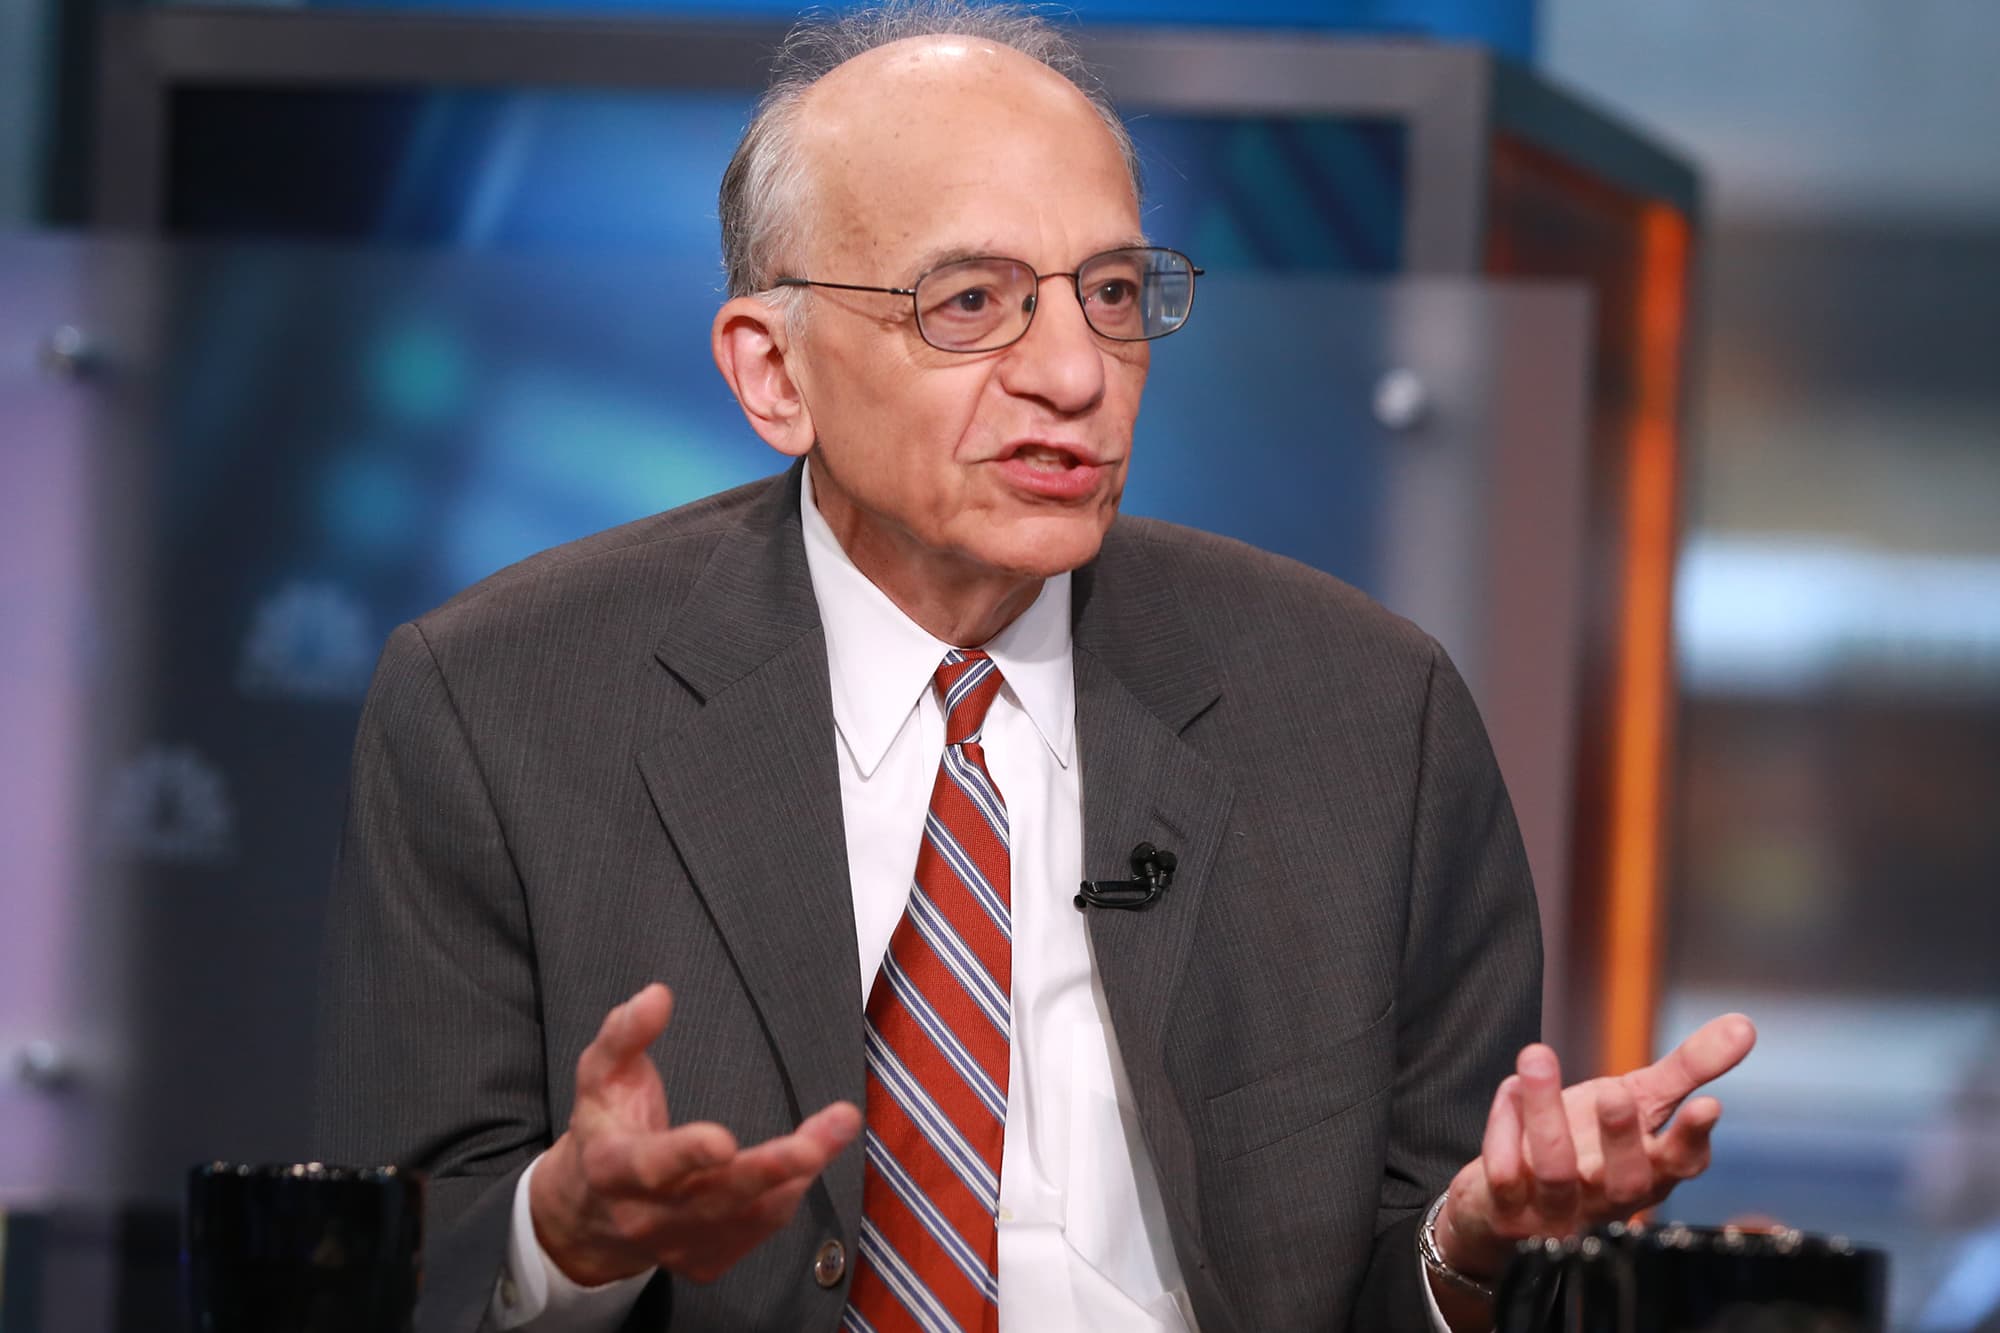 Stocks could rally as much as 20{7e5ff73c23cd1cd7ac587f9048f78b3ced175b09520fe5fee10055eb3132dce7} in 2023, predicts Wharton's Jeremy Siegel